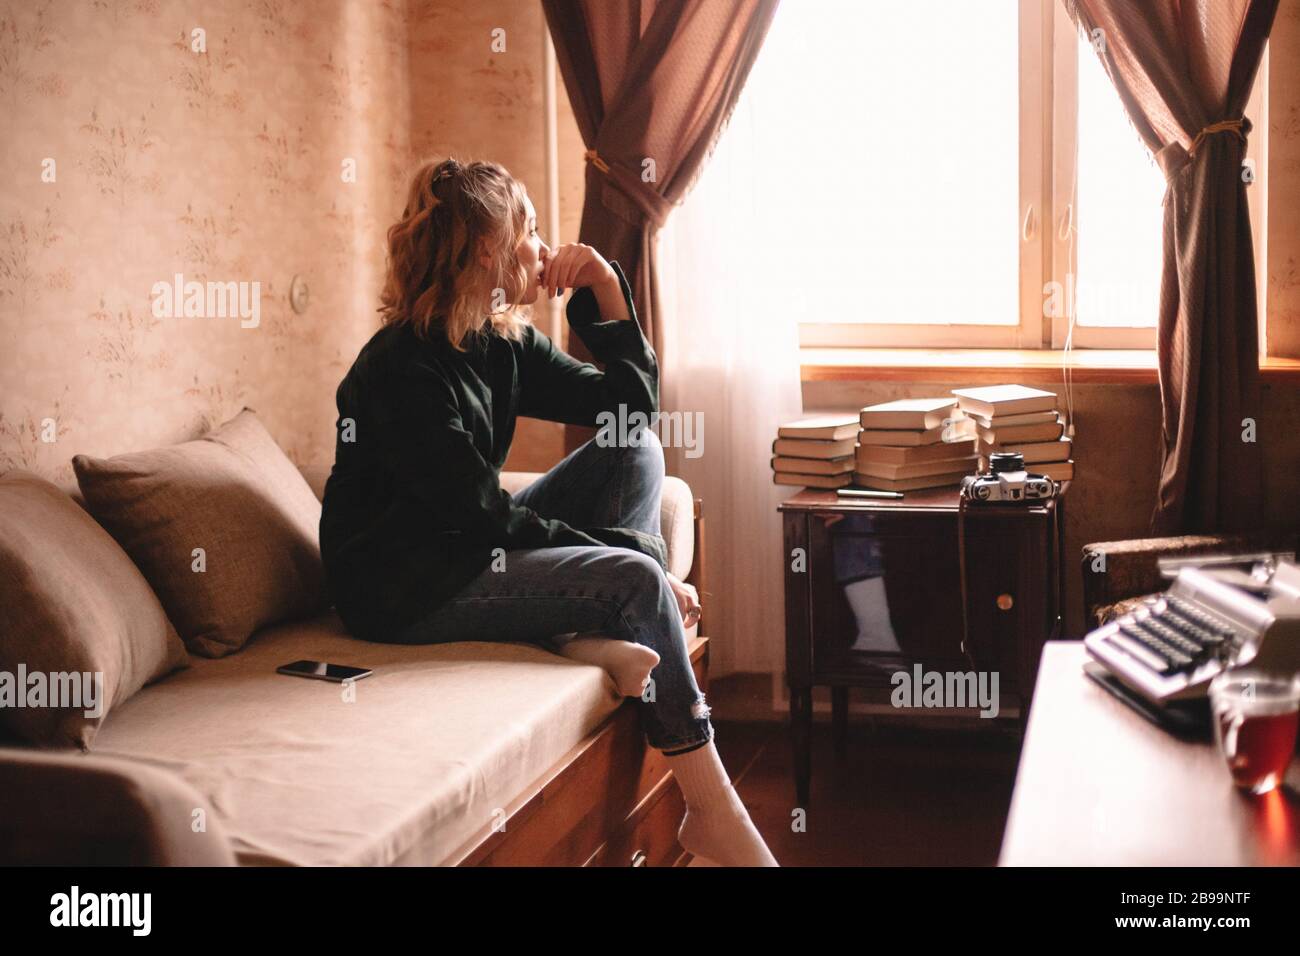 Thoughtful young woman looking through window while sitting on bed at home Stock Photo